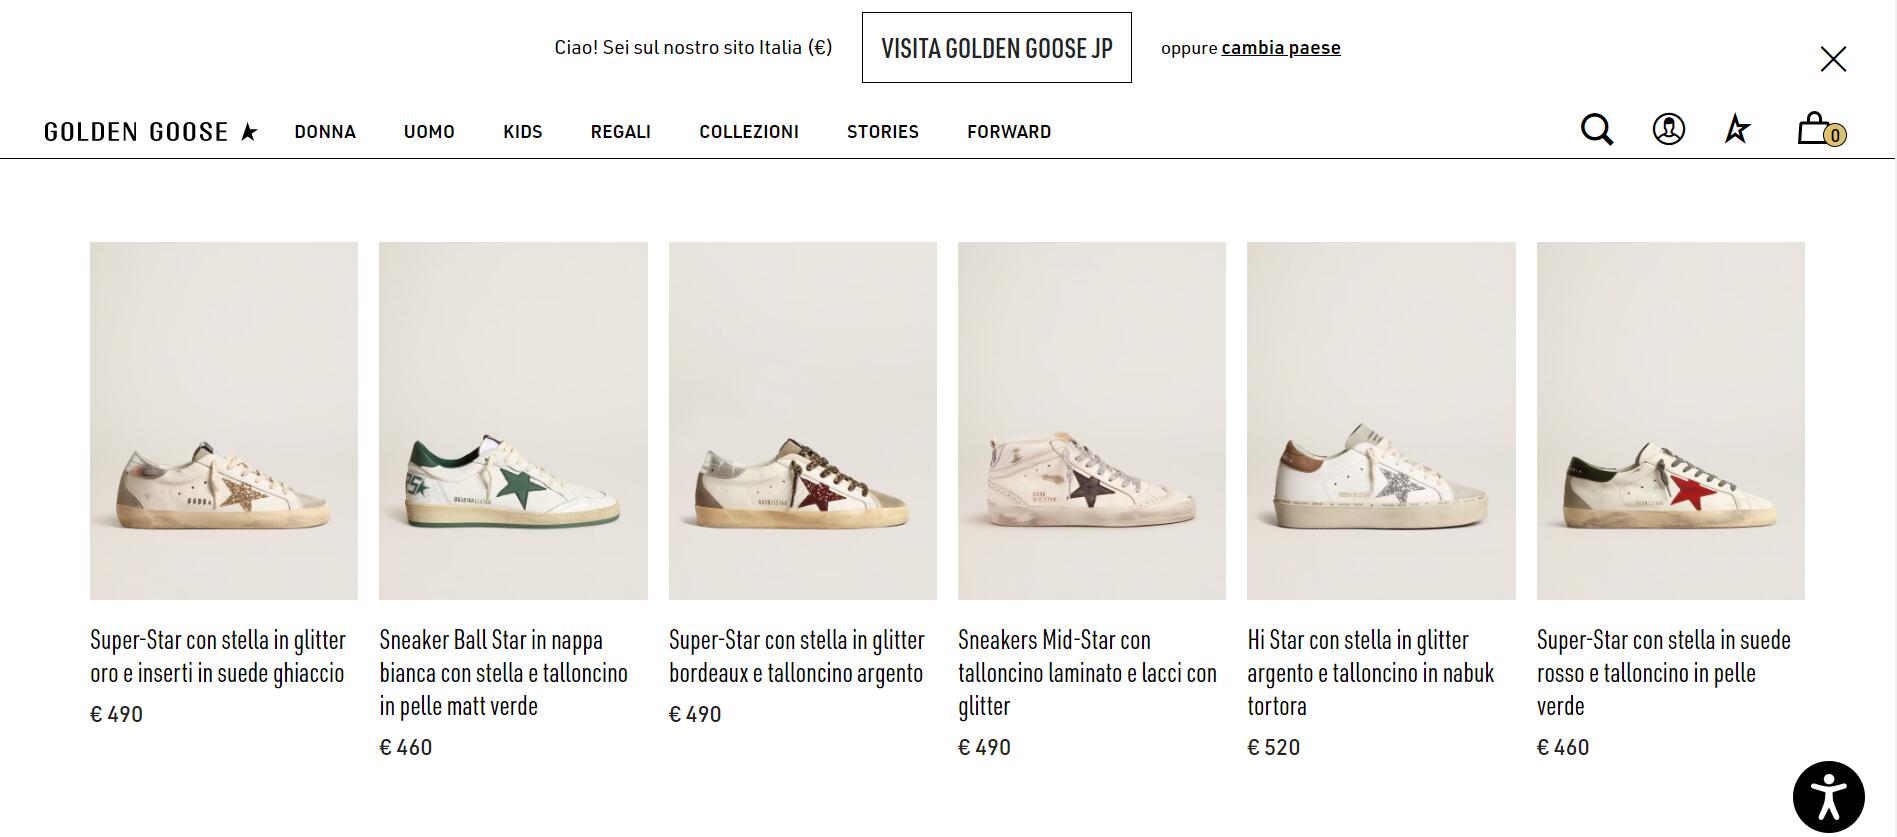 Golden Goose’s 2022 Sales Reach 500 Million Euros, May Prepare for IPO